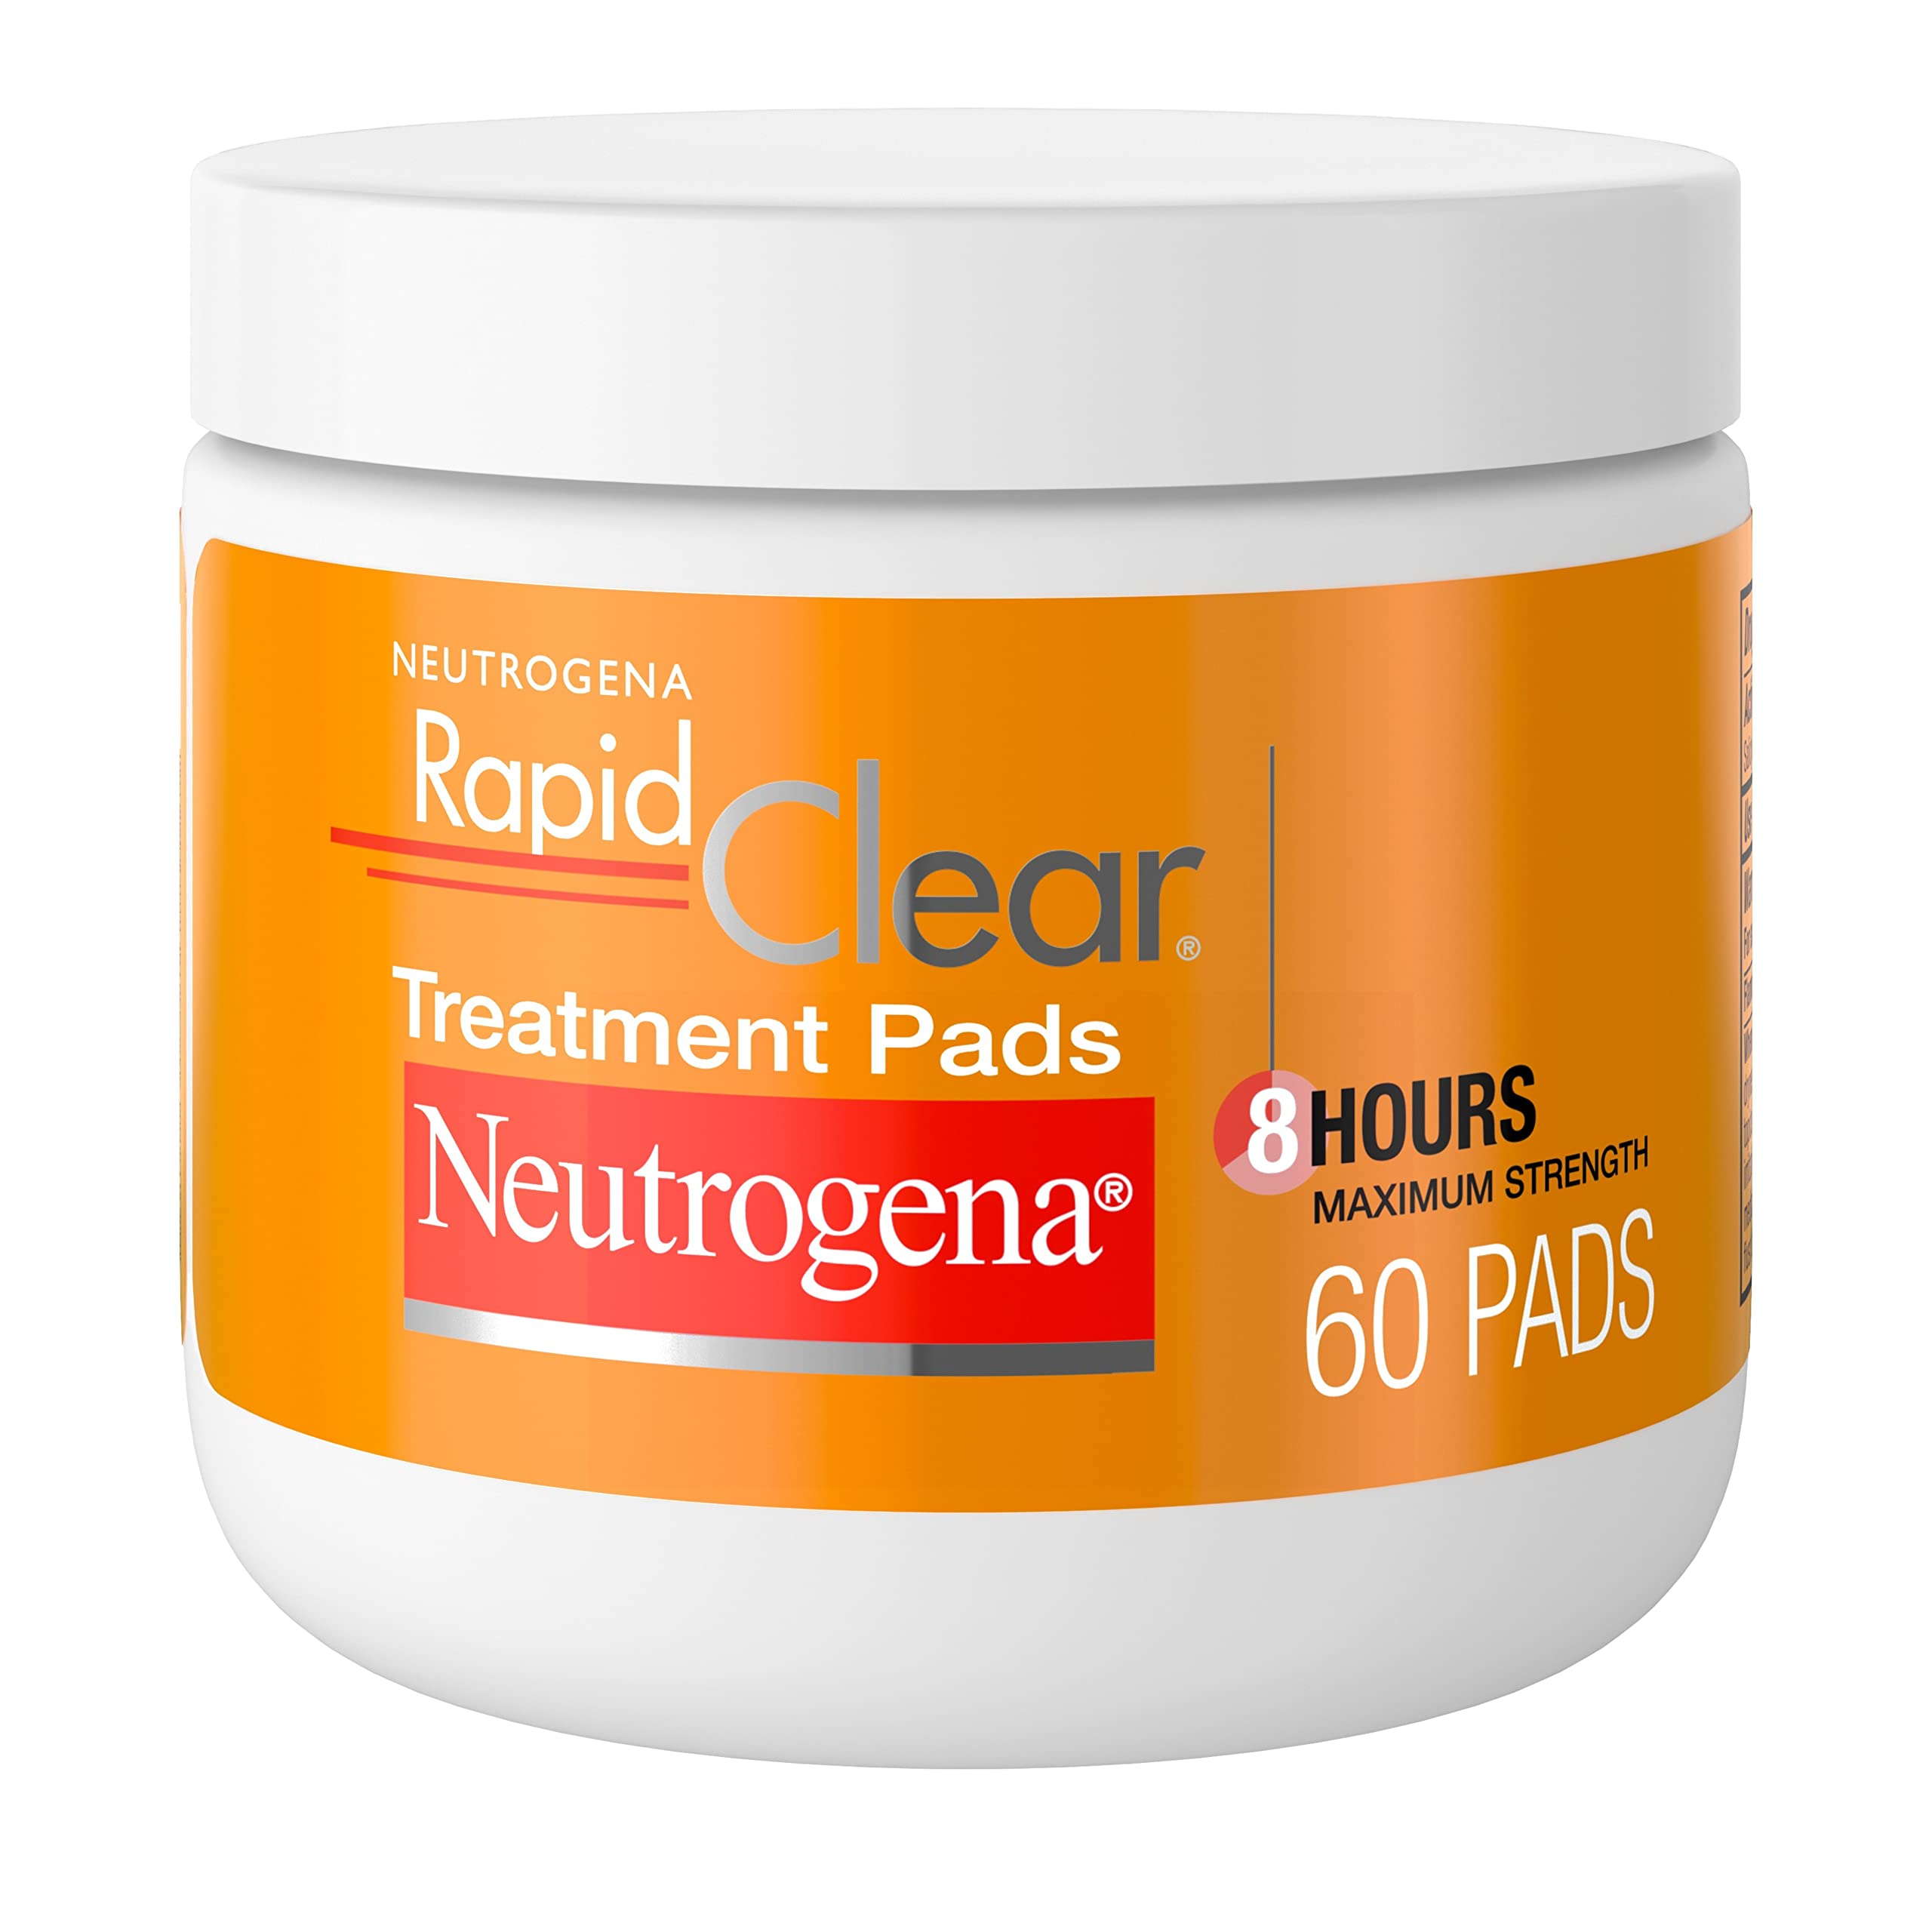 Neutrogena Rapid Clear Maximum Strength Acne Face Pads with 2% Salicylic Acid Acne Treatment Medication to Help Fight Breakouts, Oil-Free Facial Cleansing Pads for Acne-Prone Skin, 60 ct